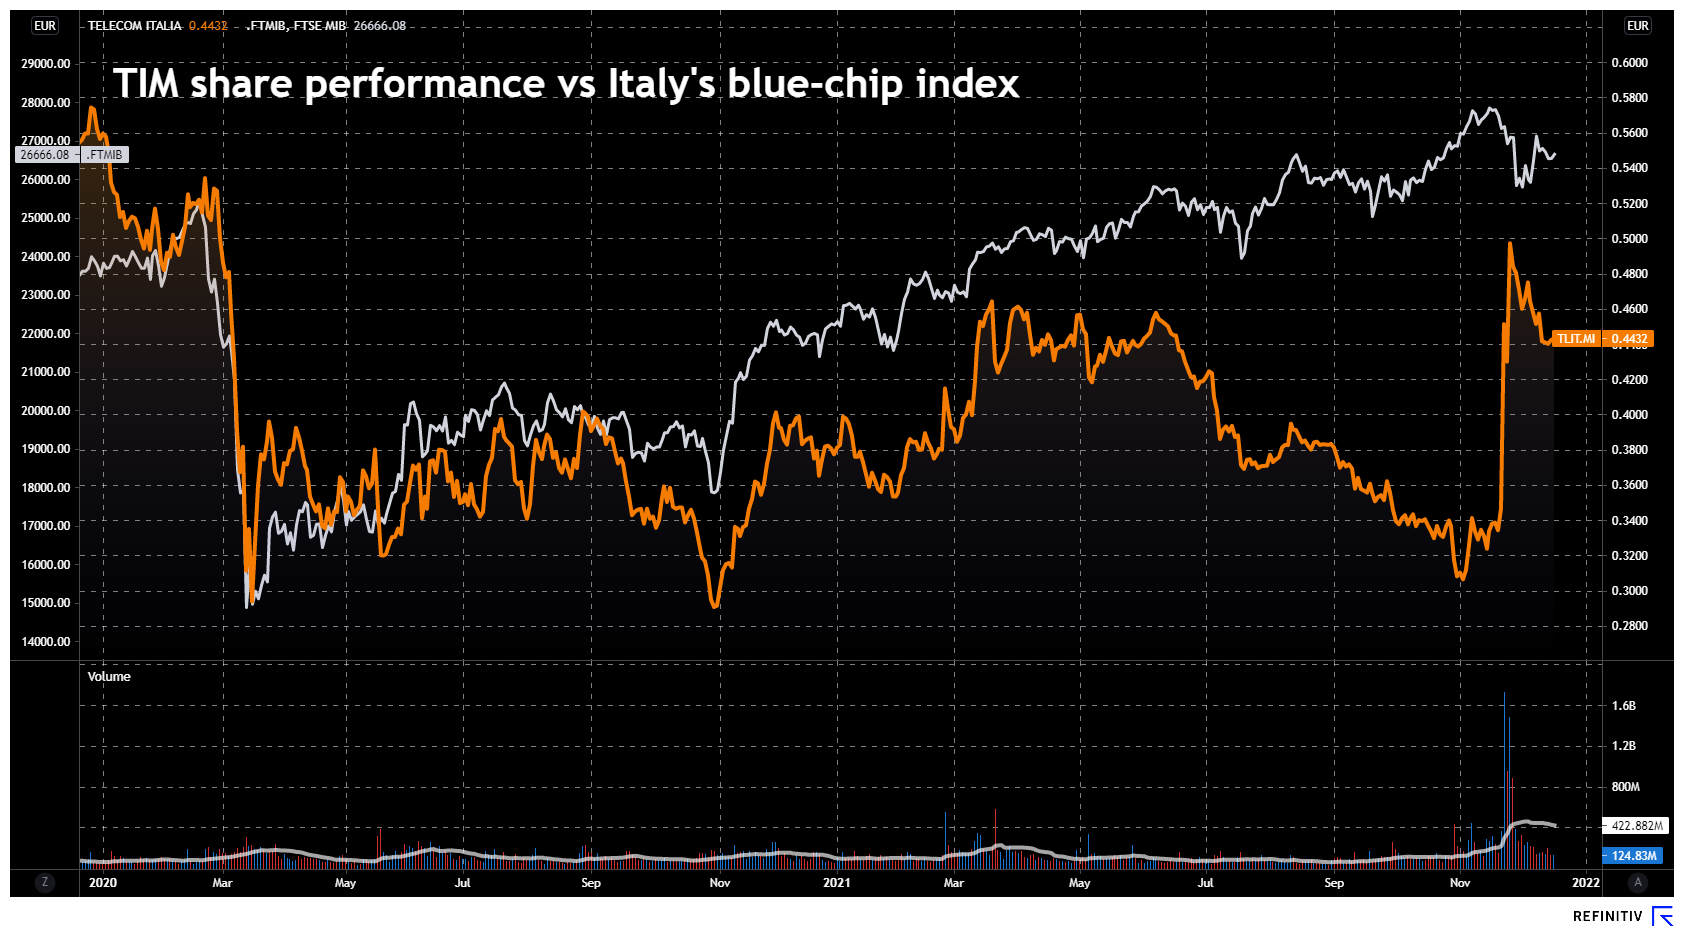 TIM share performance vs Italy's blue-chip index